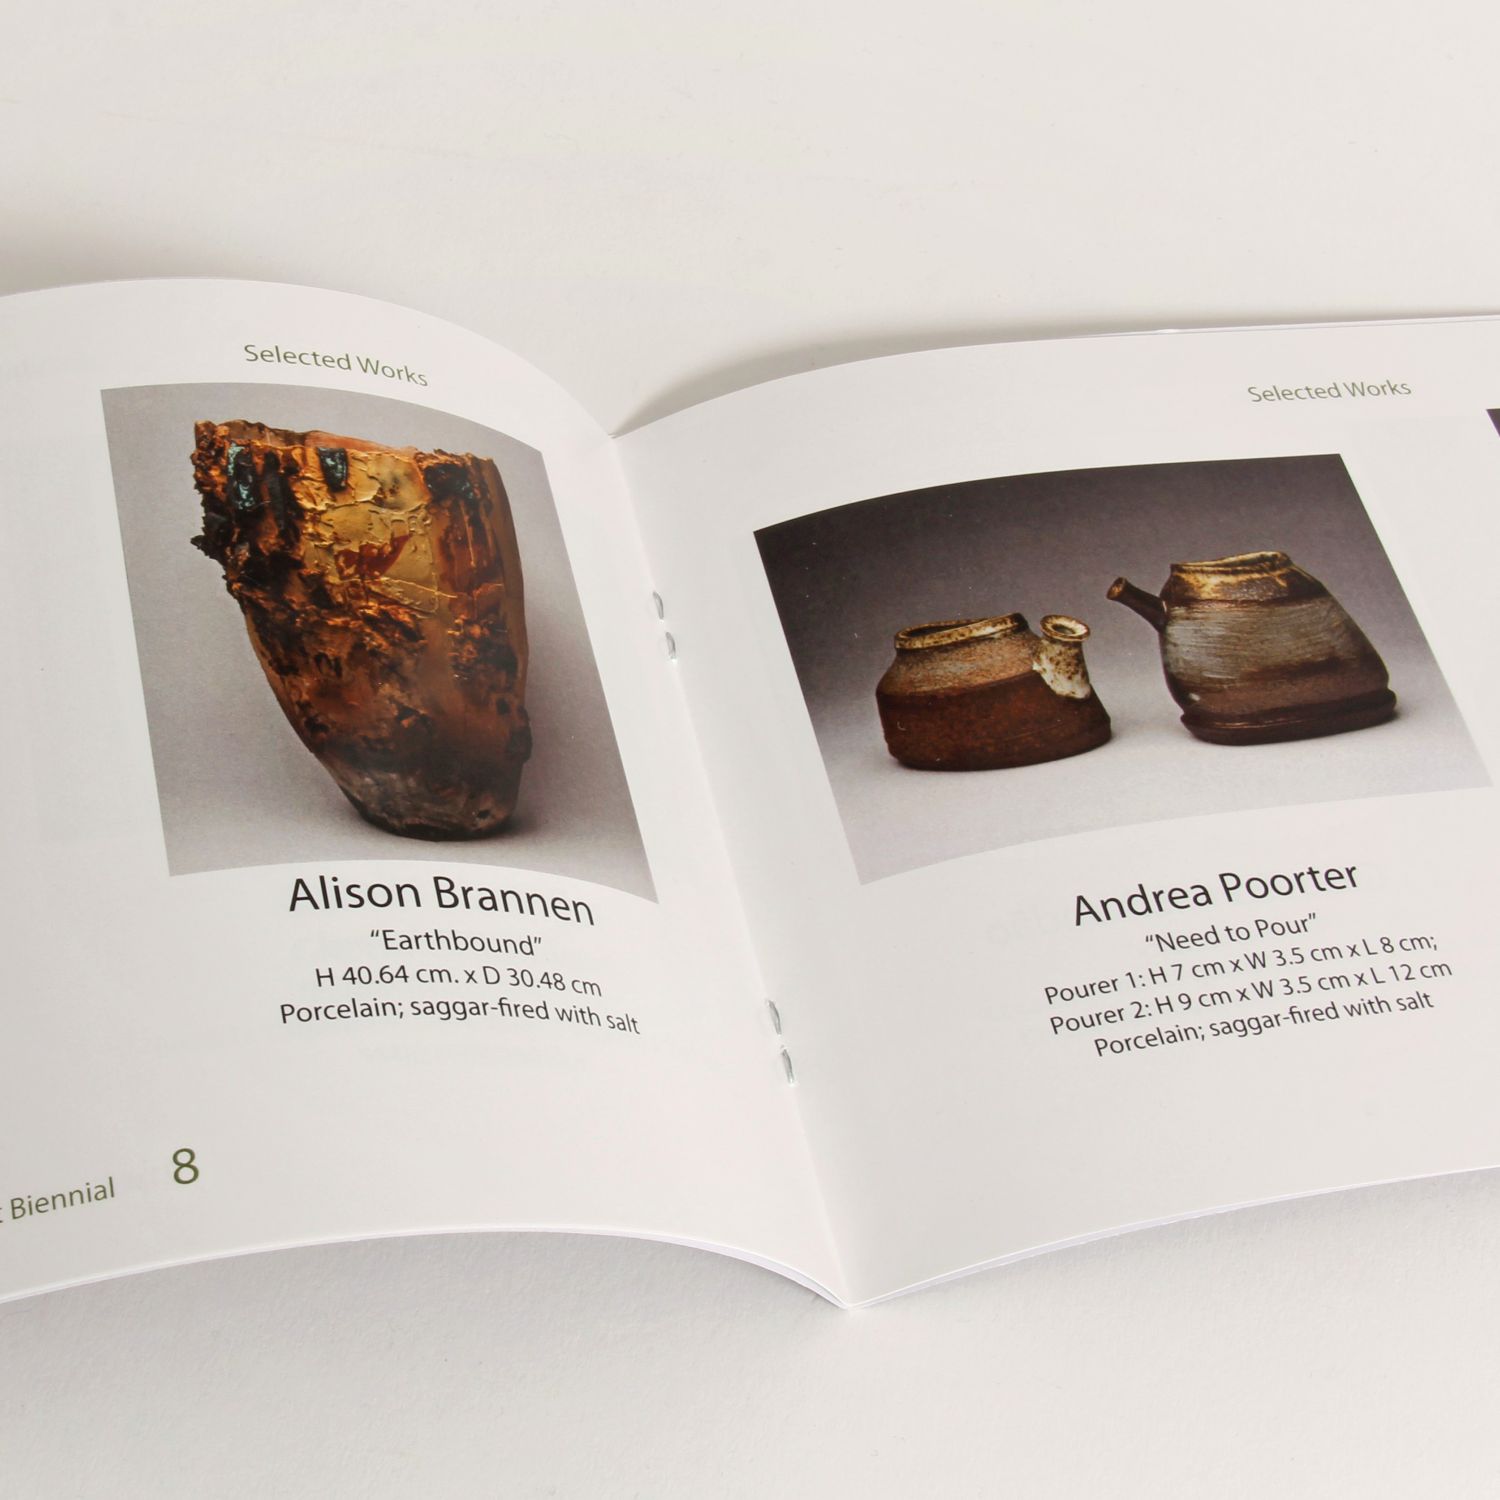 21 st Biennial Exhibition: Toronto Potters Catalogue Product Image 3 of 6